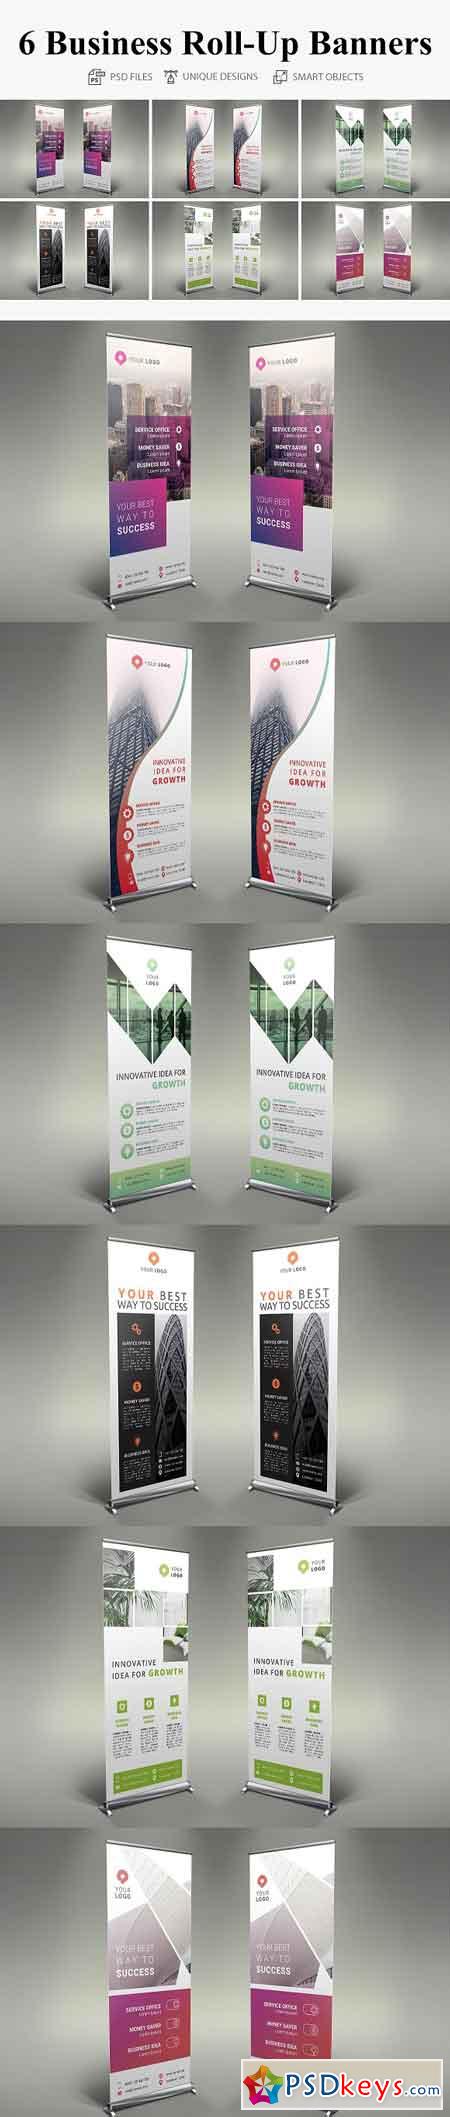 6 Business Roll Up Banners 2708038